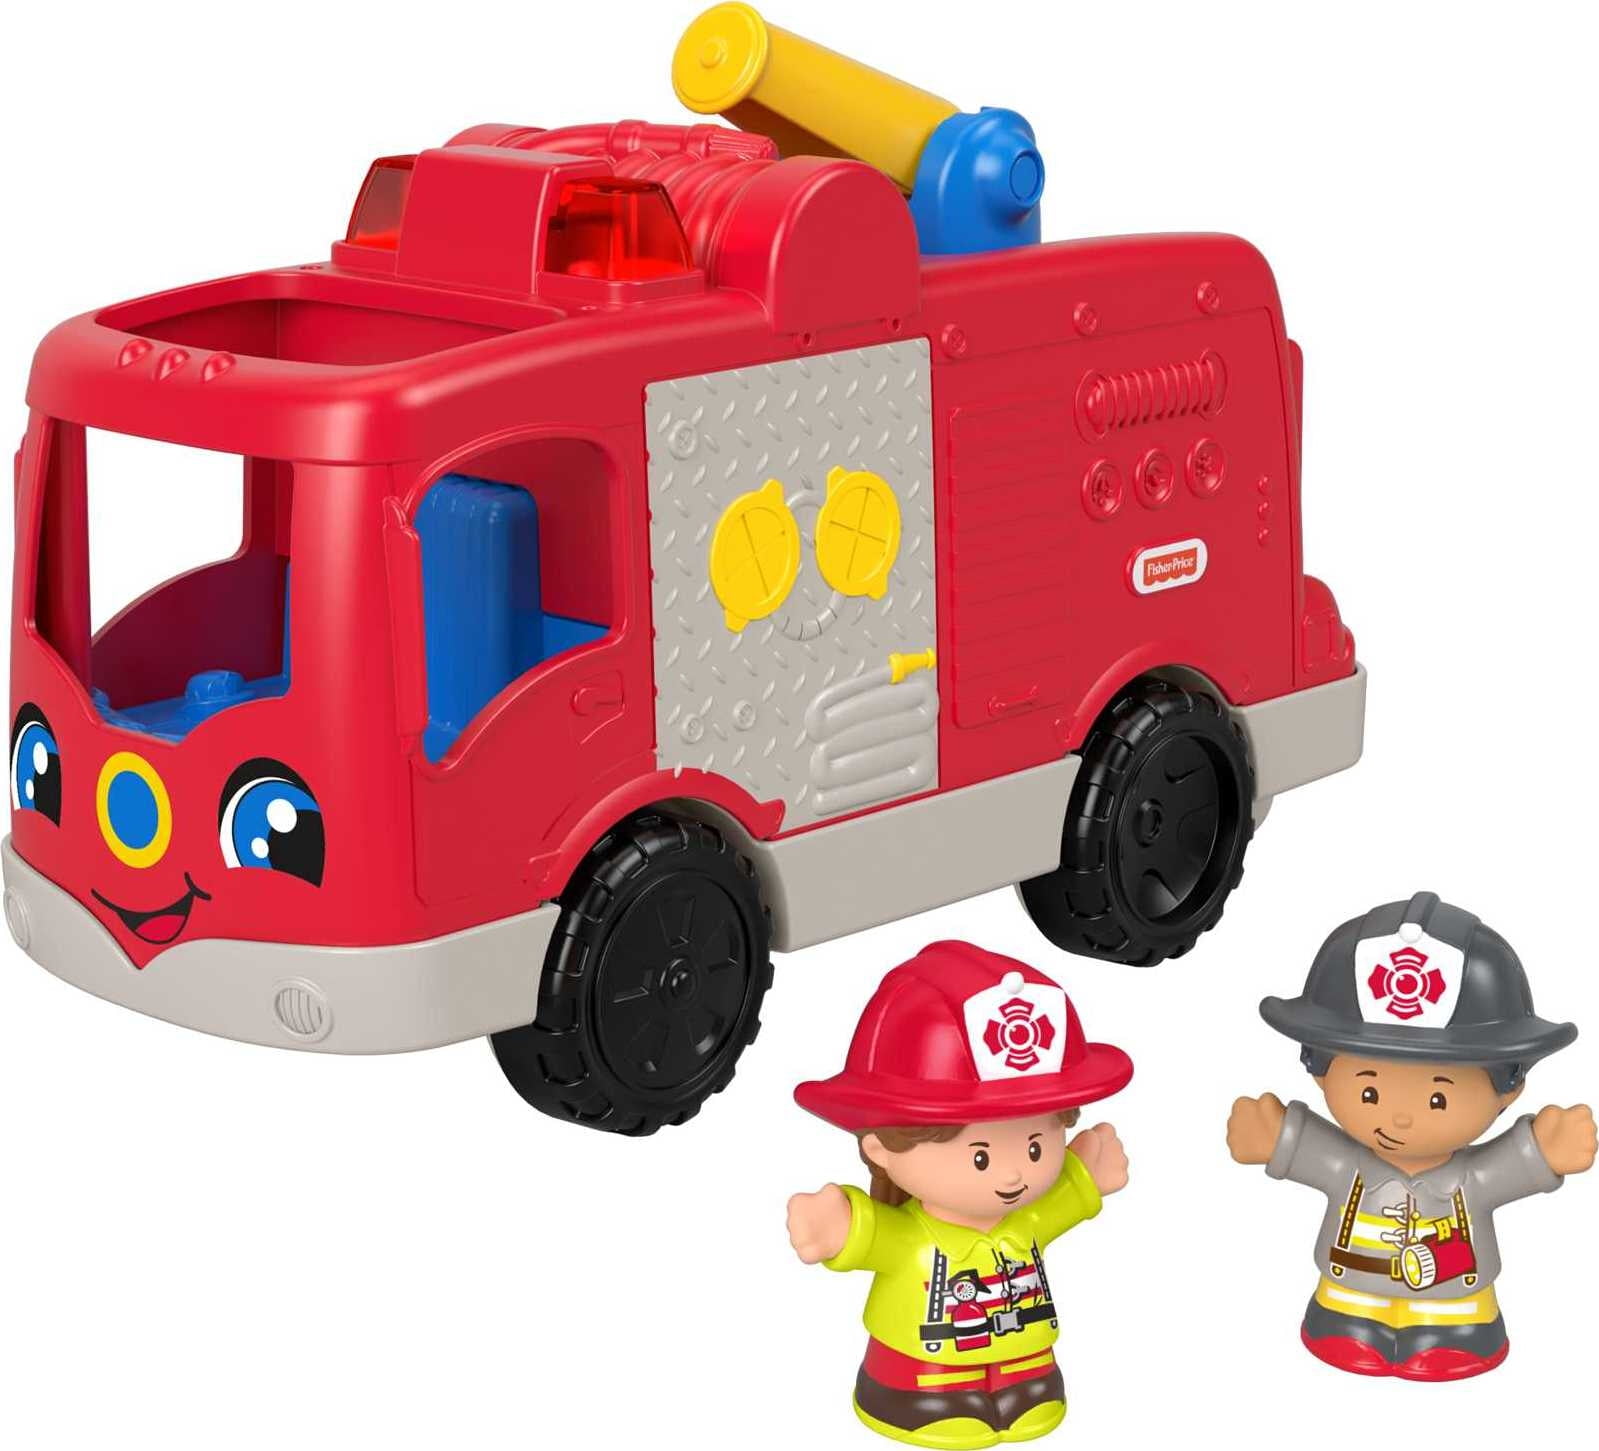 Fisher-Price Little People Helping Others Fire Truck Musical Toddler Toy with 2 Firefighter Figures